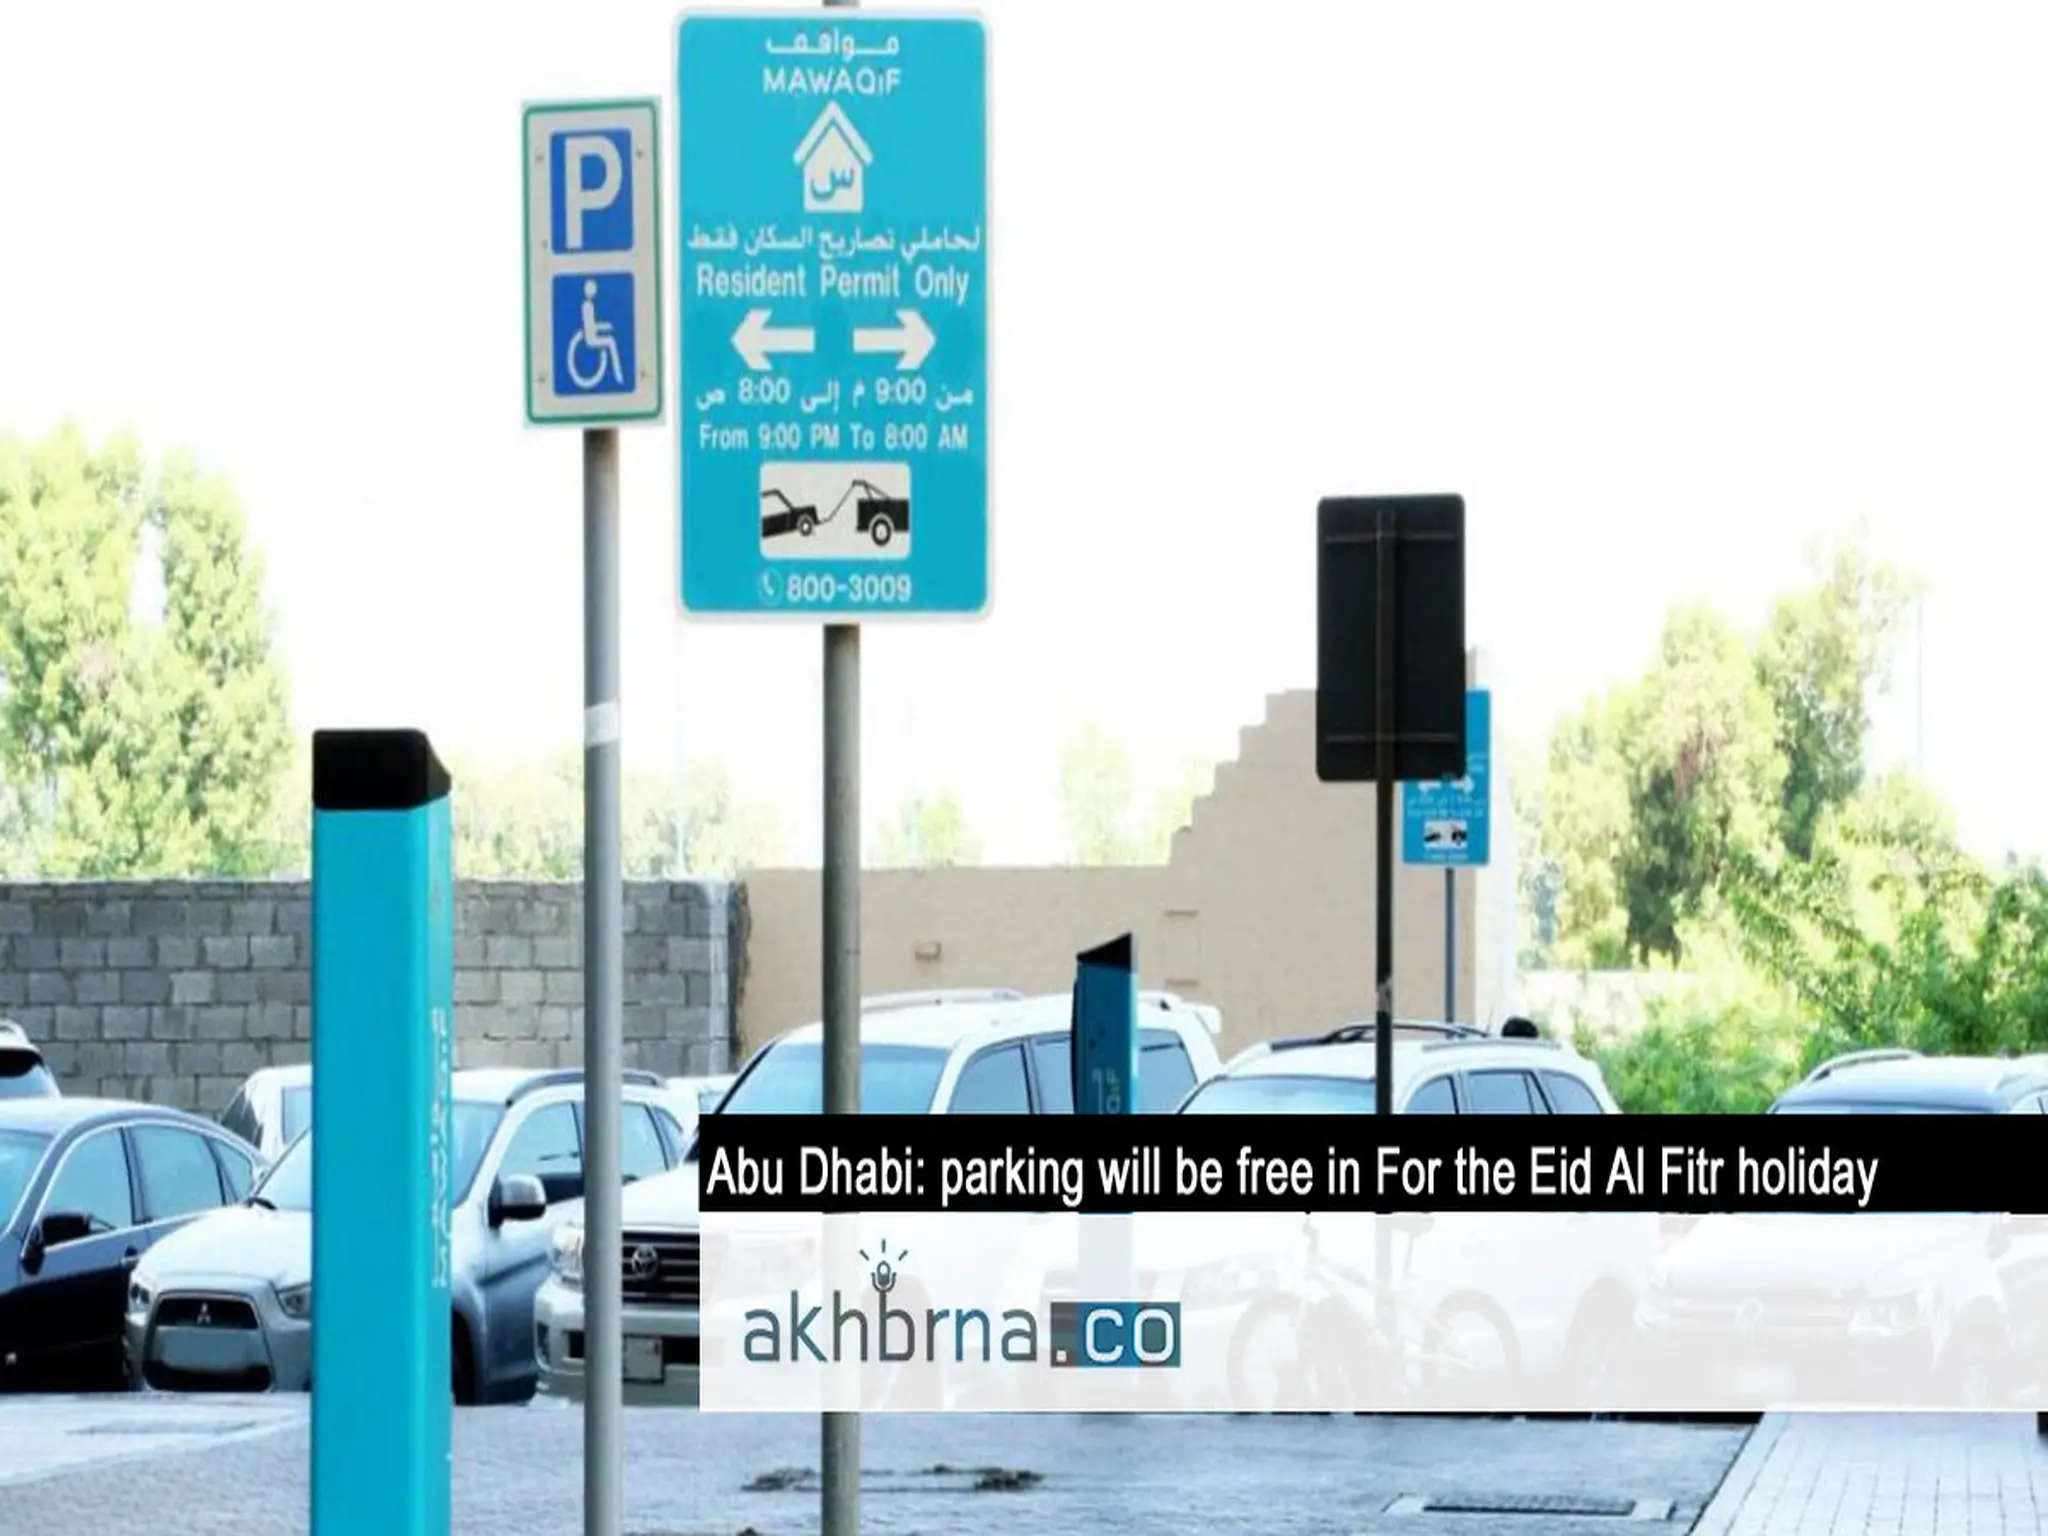 Abu Dhabi: parking will be free For the Eid Al Fitr holiday